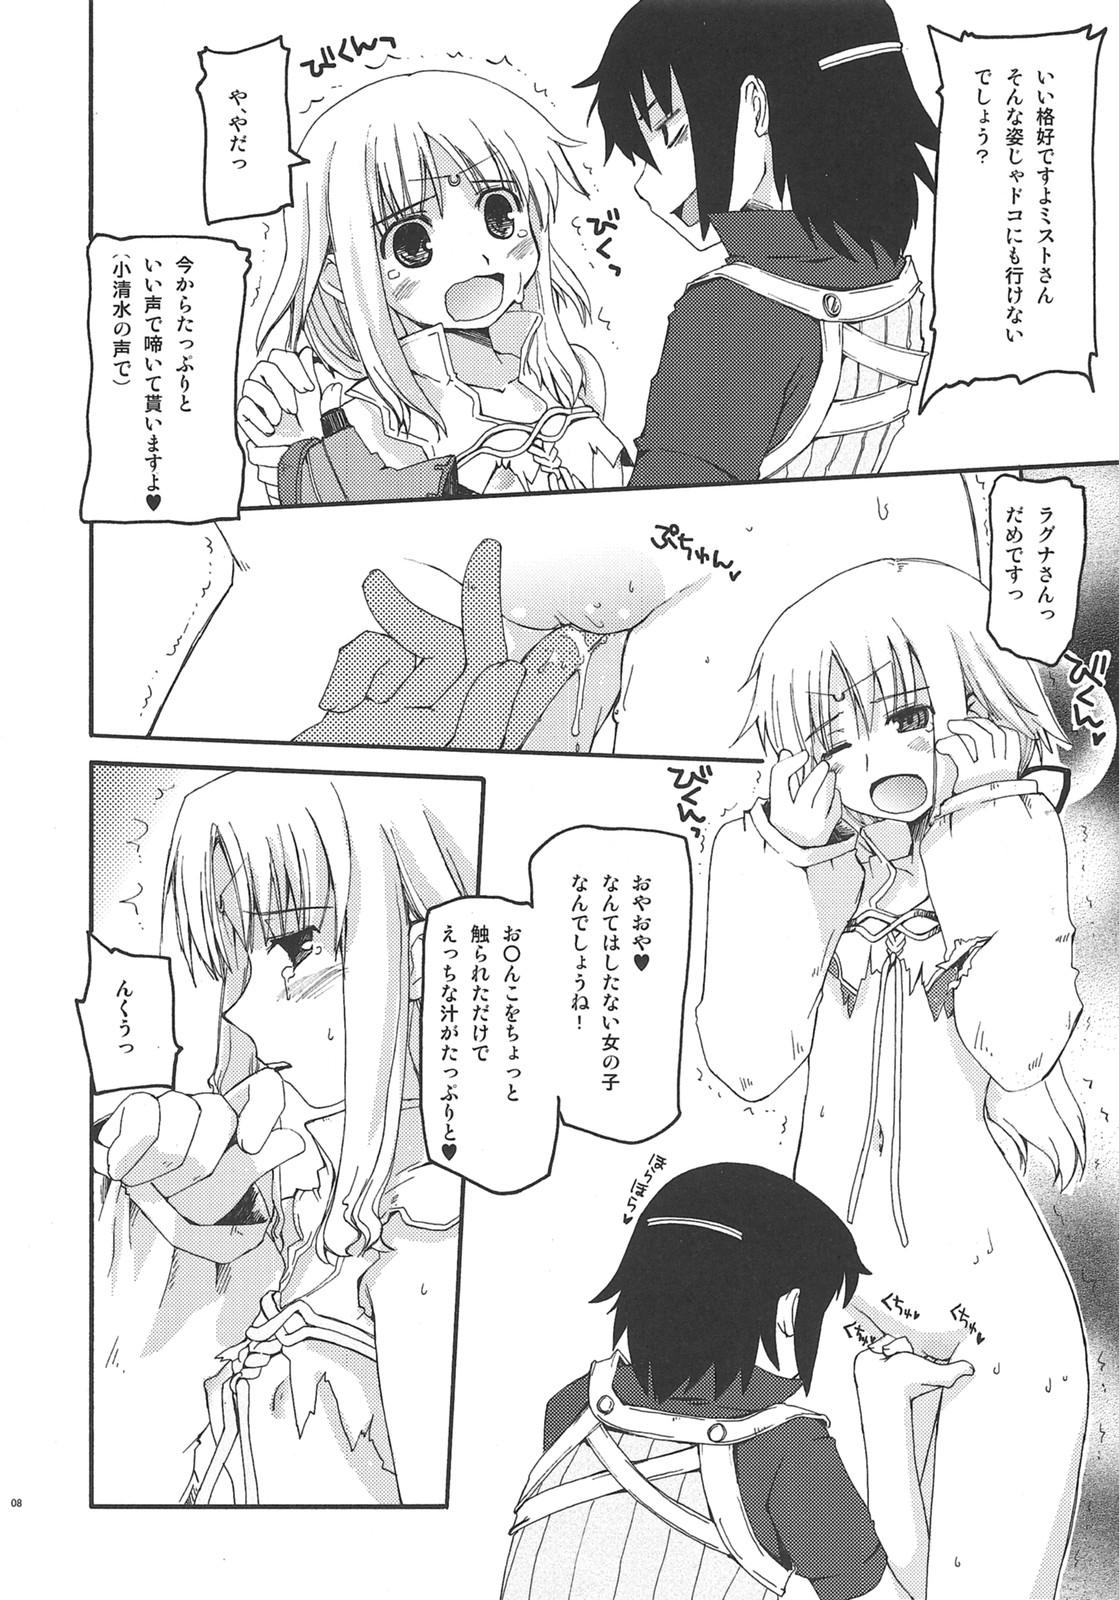 Gonzo Walking with strangers - Rune factory Fat Pussy - Page 7